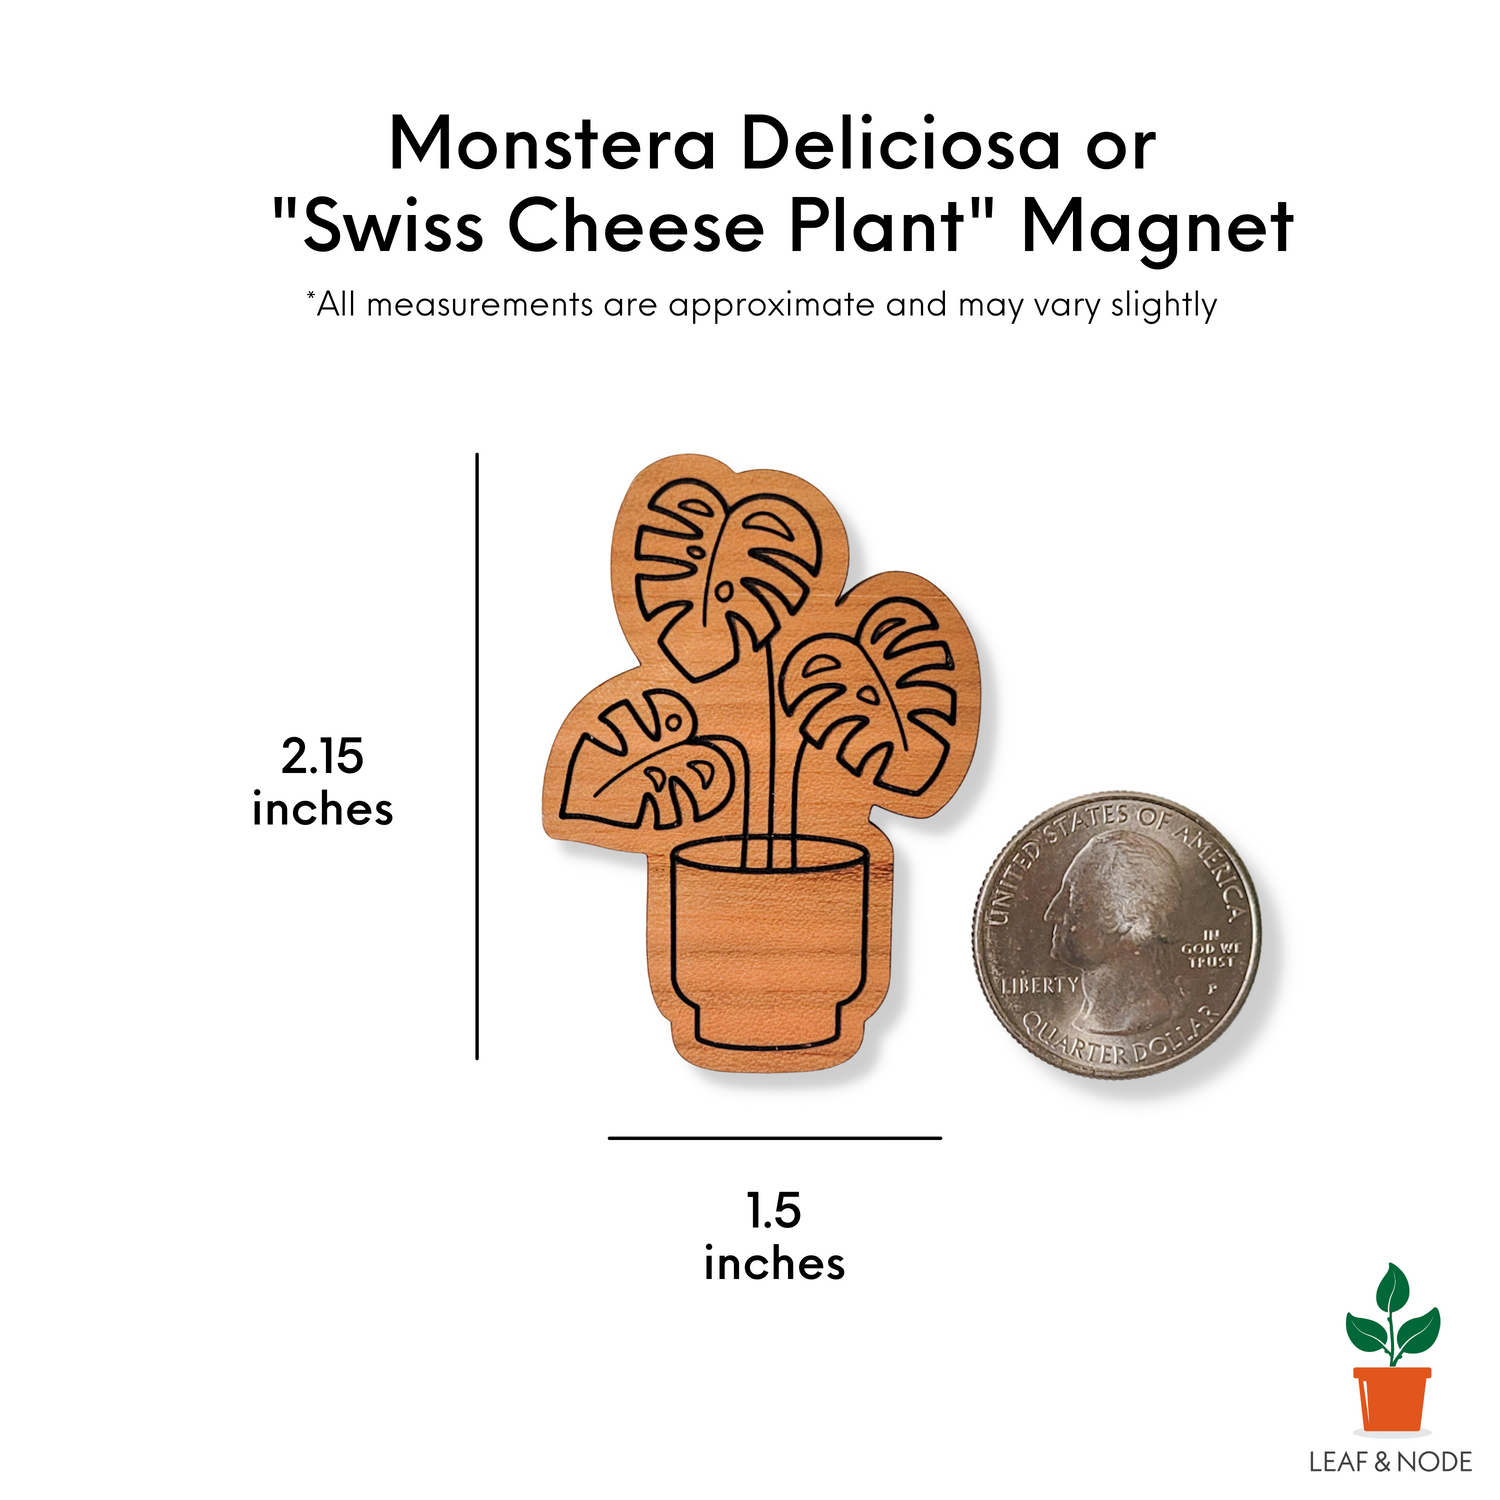 Engraved monstera magnet on white background with size information that matches the written product description.